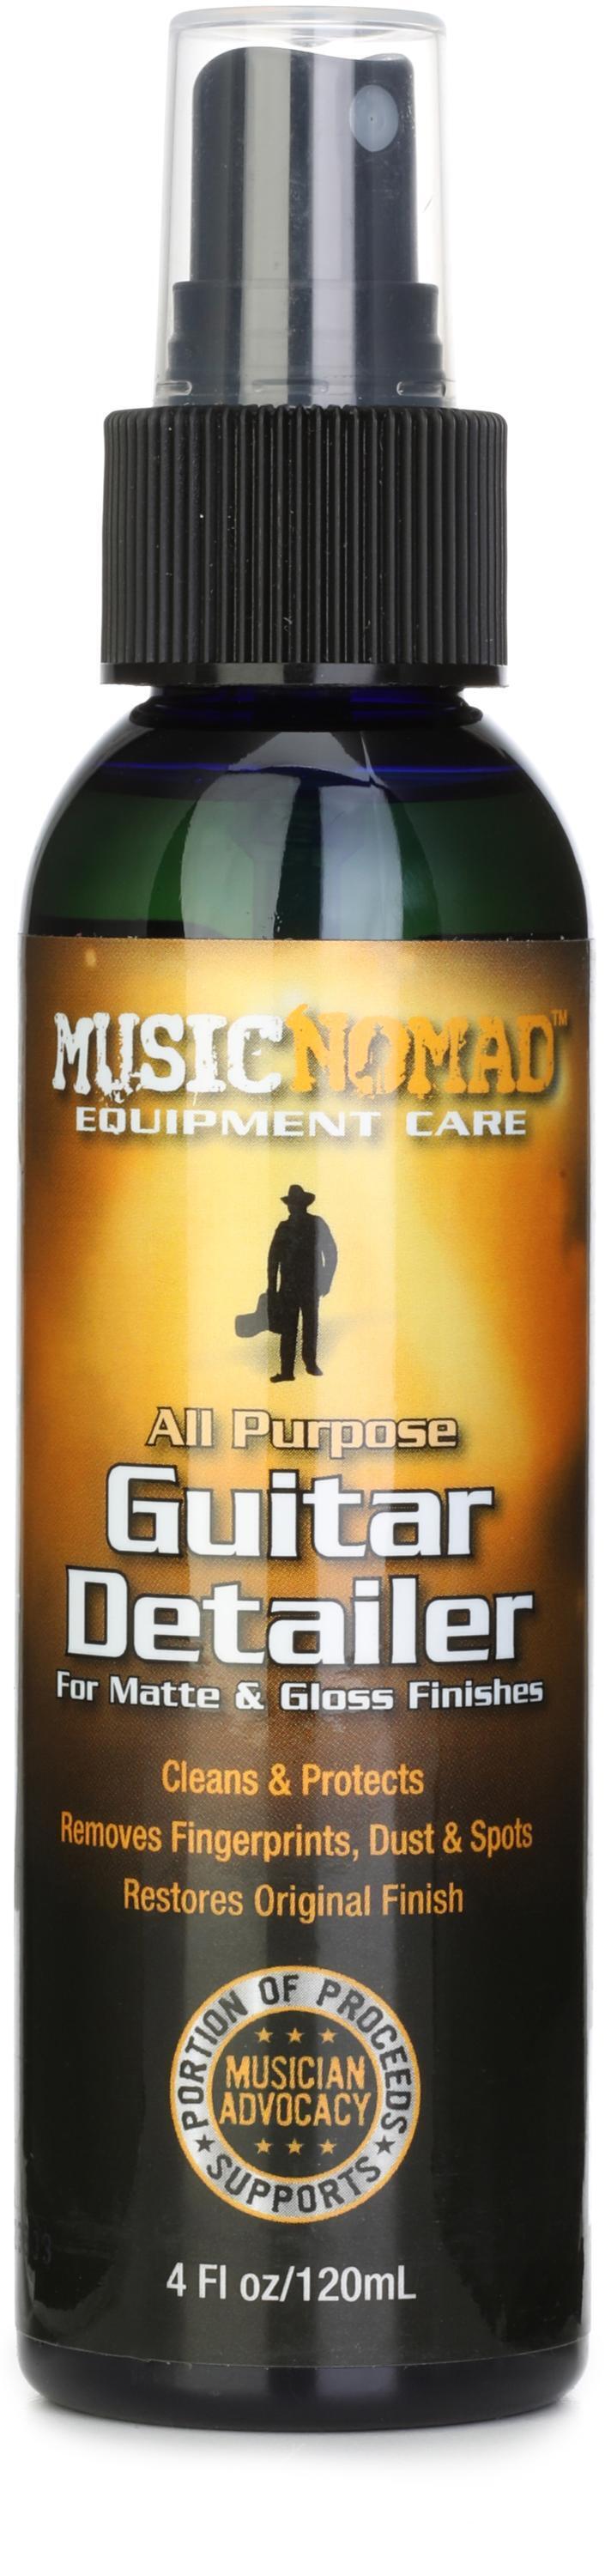 Guitar All-in-One Accessories Starter Kit | Fretboard Oil Conditioner,  All-Purpose Cleaner, Plush Microfiber Cloth, Tuner, and More! Everything  You